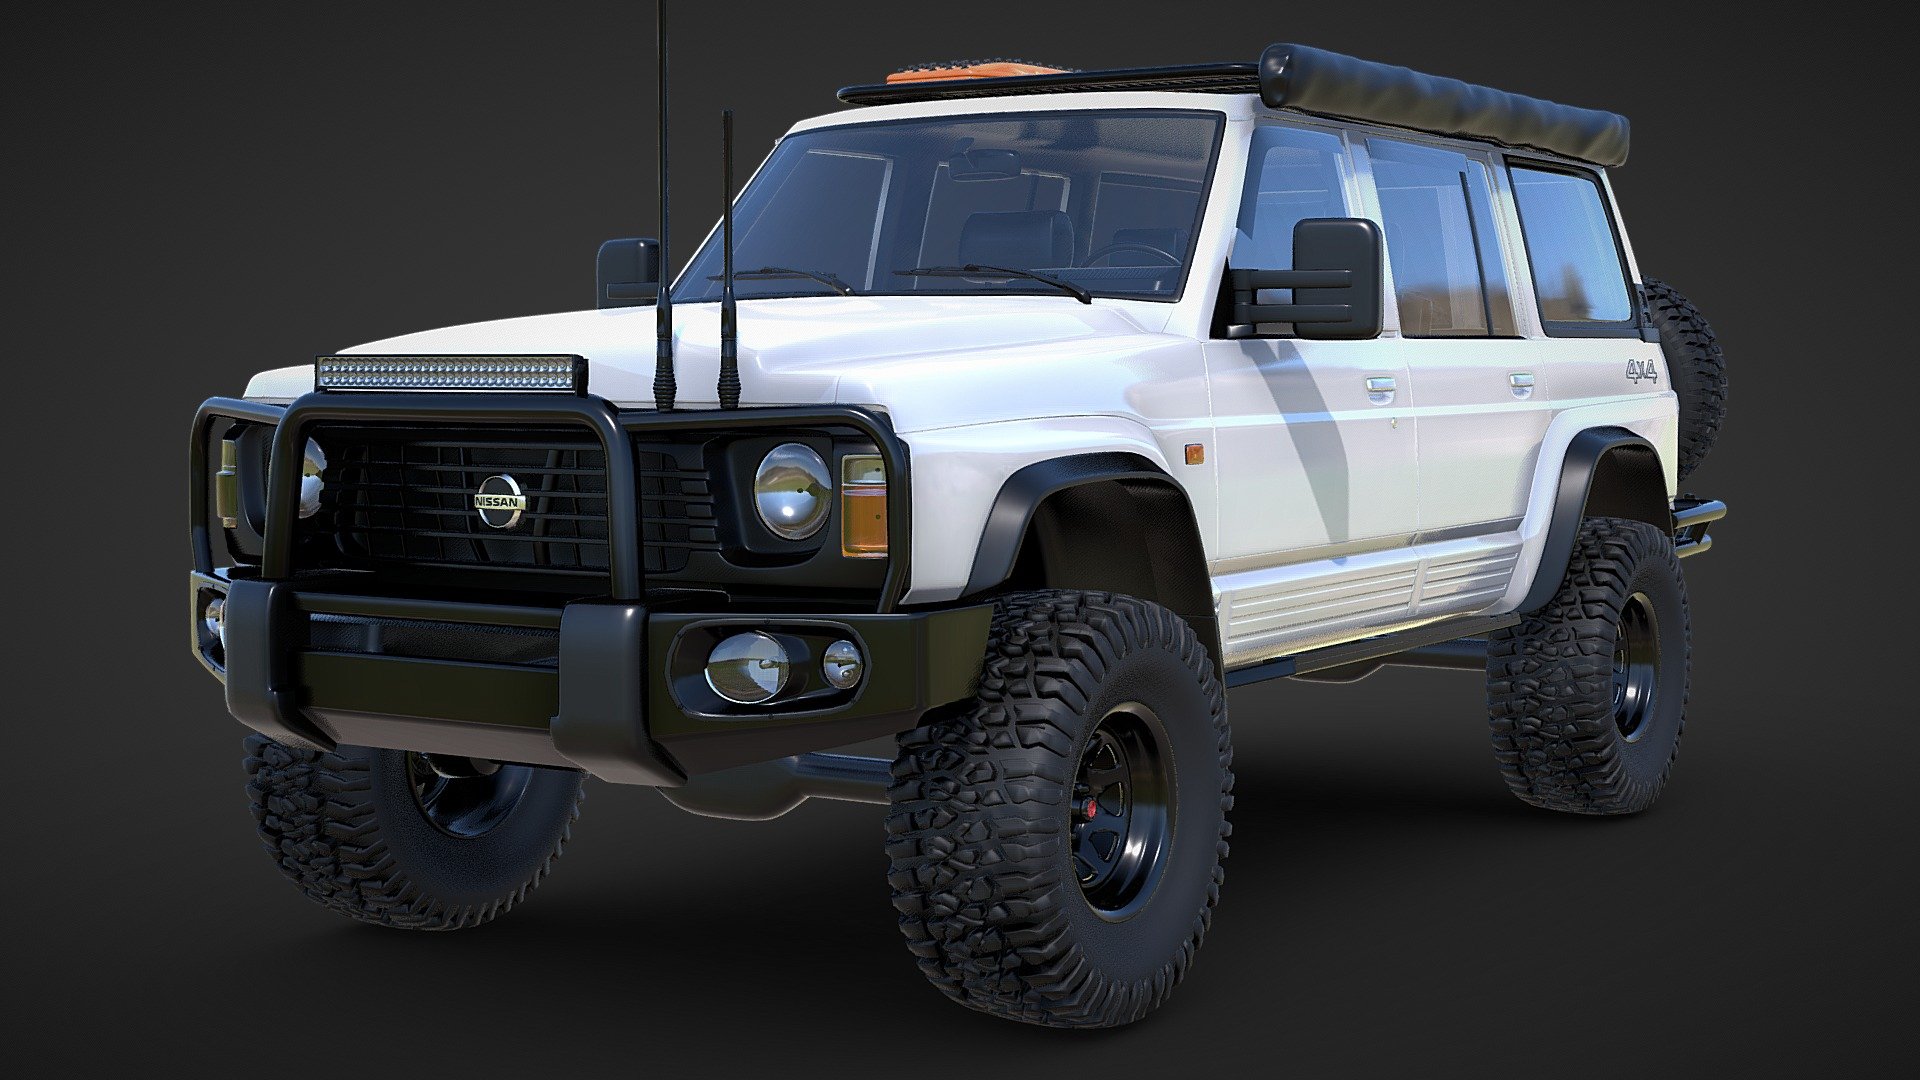 Nissan GQ Patrol Touring Variation - Nissan GQ Patrol Touring - Buy Royalty Free 3D model by Pitstop 3D (@Pitstop3D) 3d model